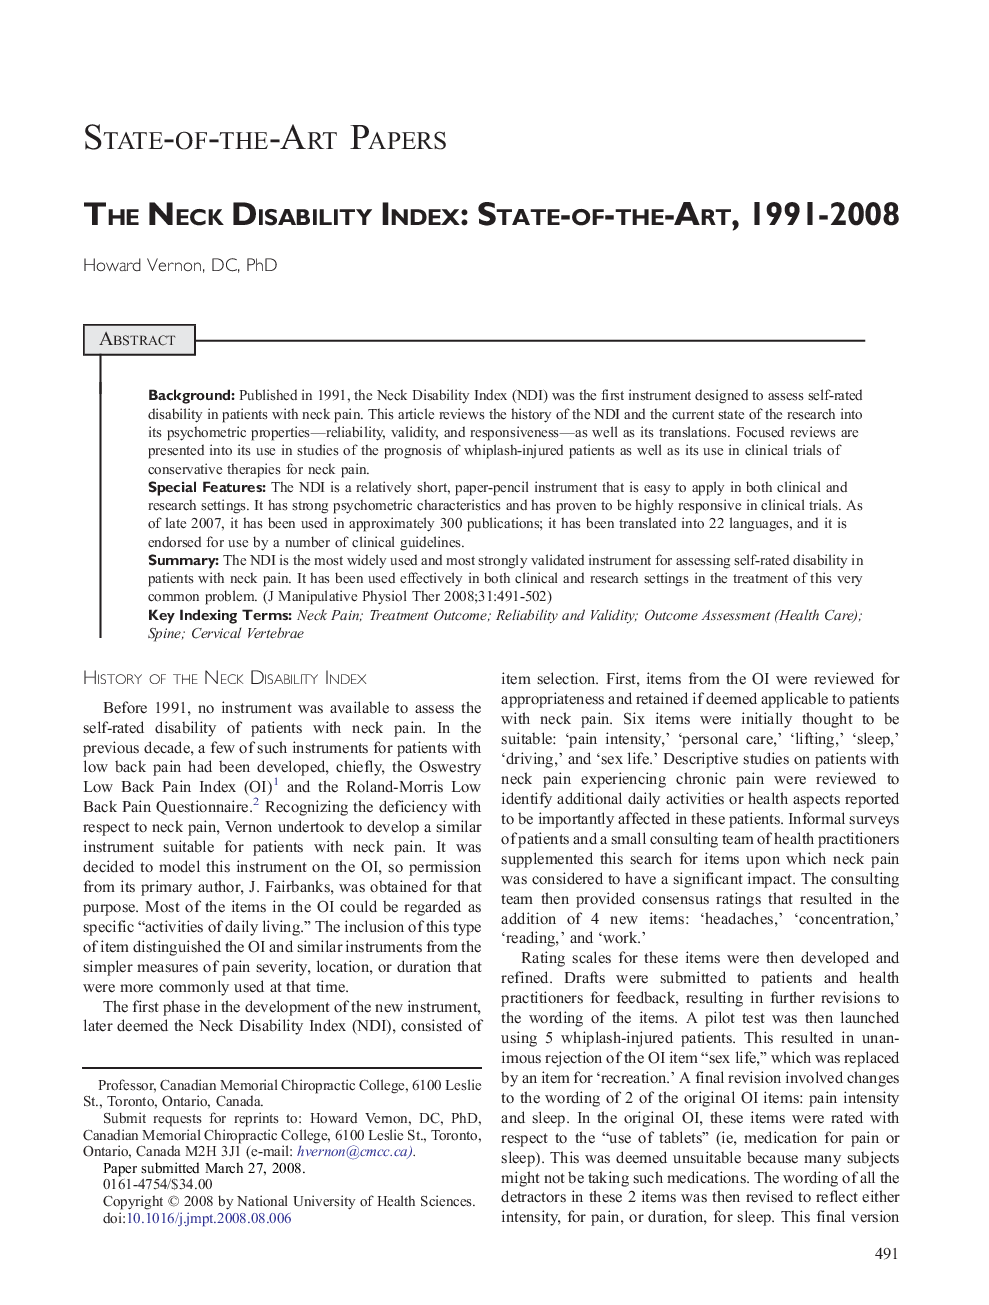 The Neck Disability Index: State-of-the-Art, 1991-2008